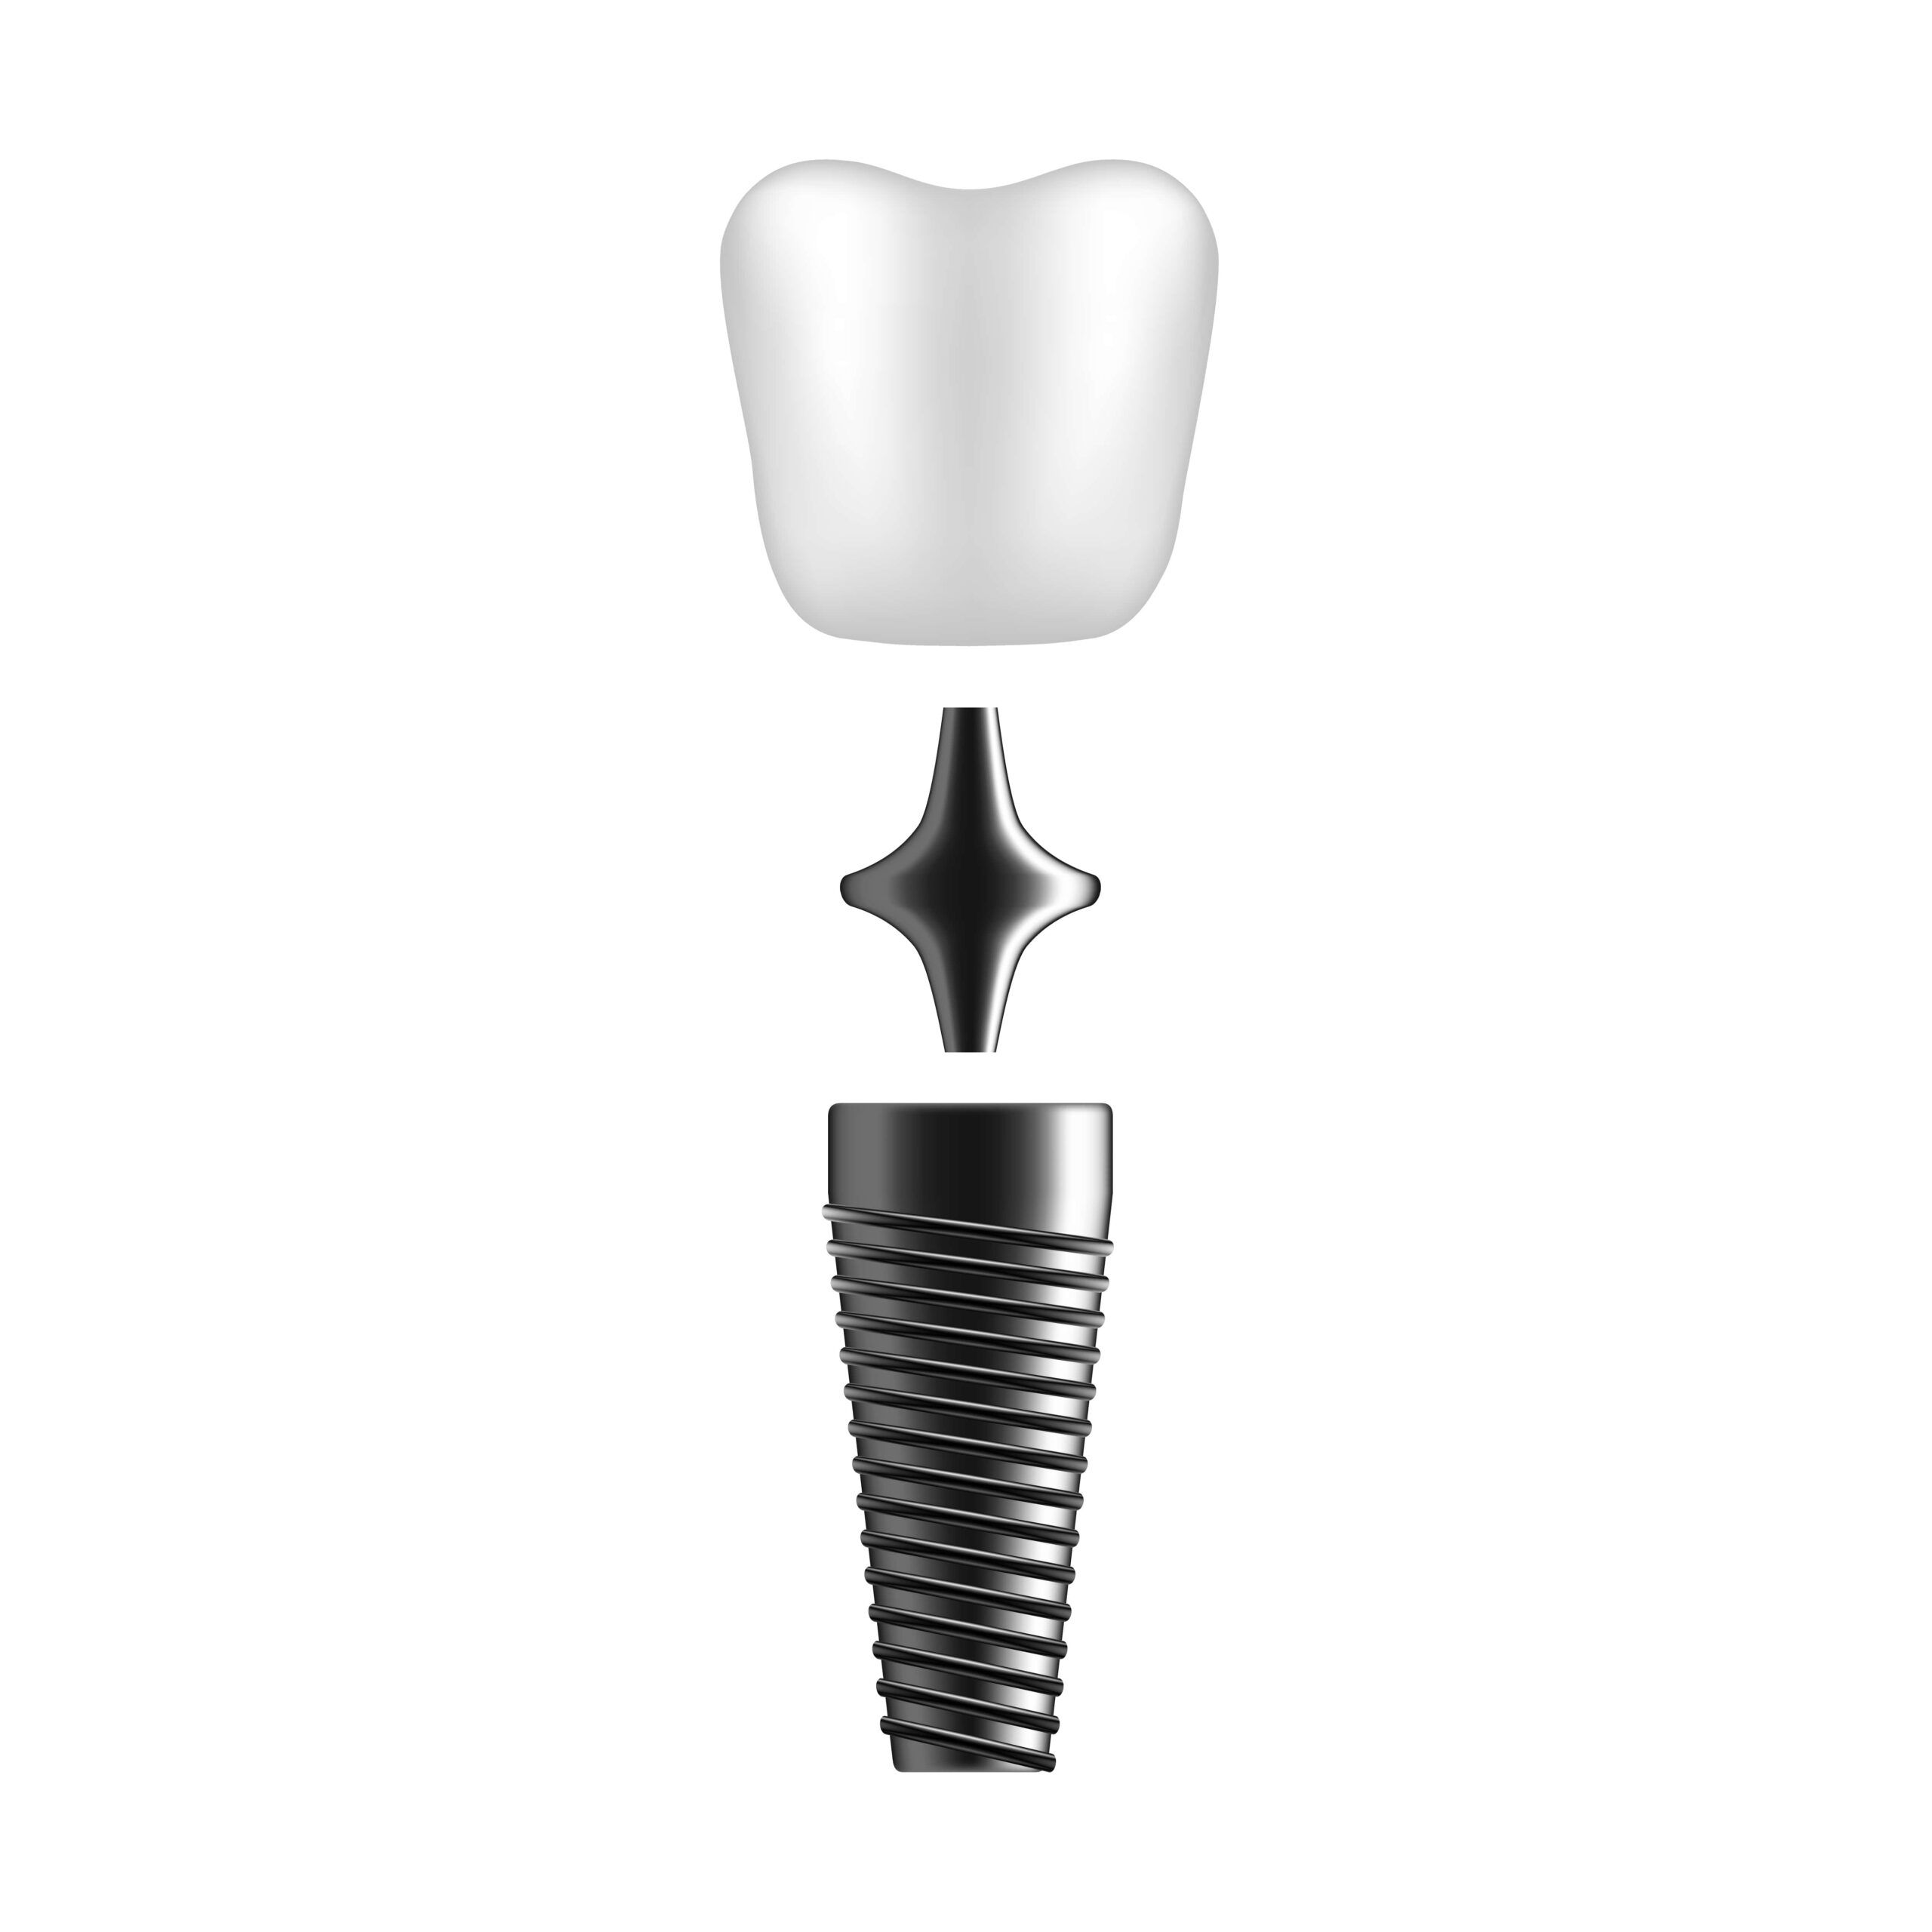 Things You Didn’t Know About Dental Implants